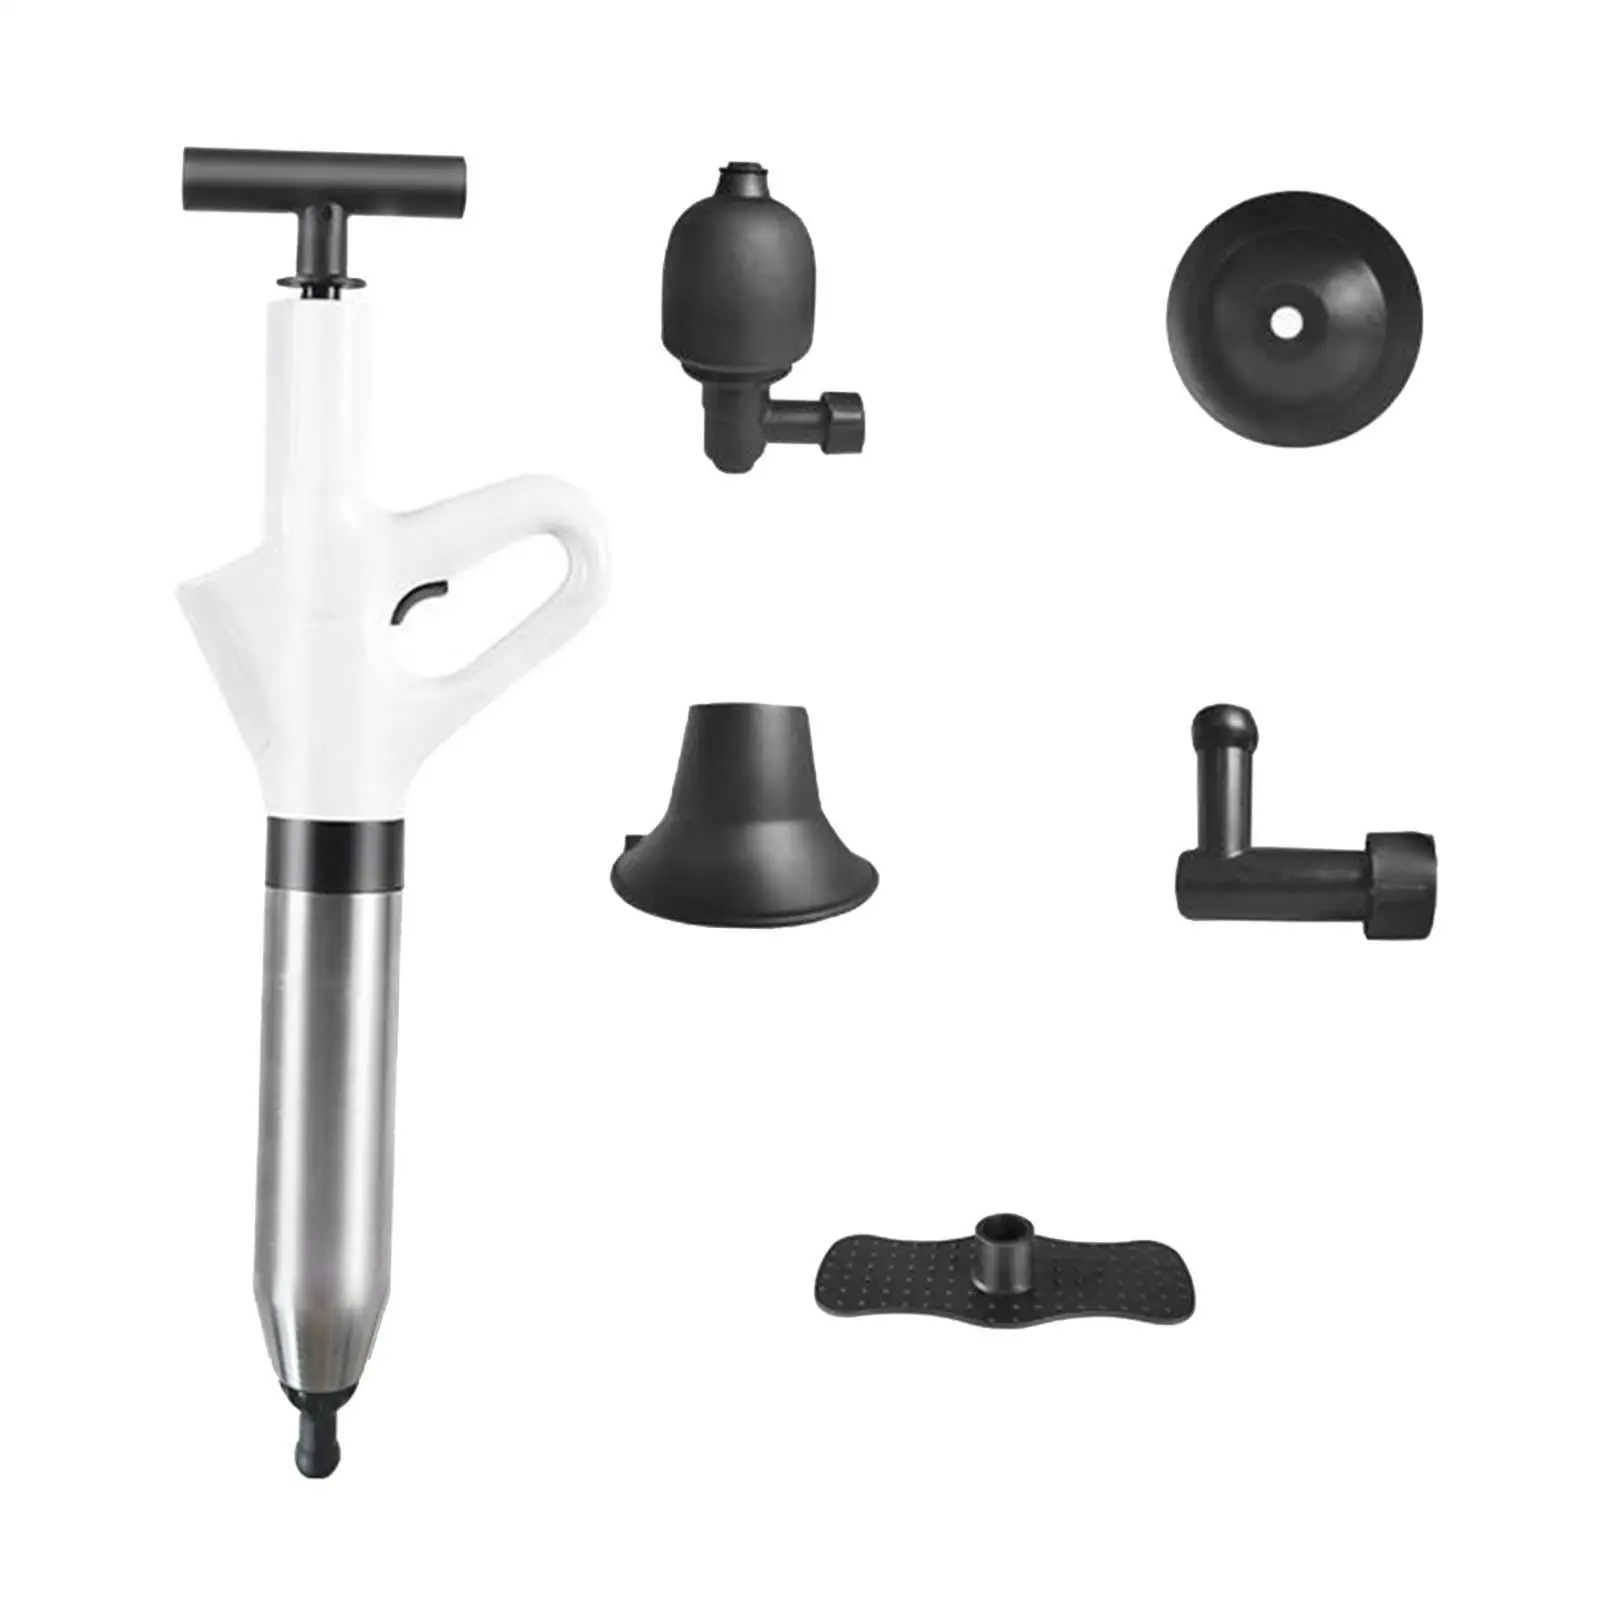 Toilet Air Pressure Plunger Pump Professional Sink Plungers for Blocked Pipe Floor Drain Clogged Toilet Sewer Toilet Drain